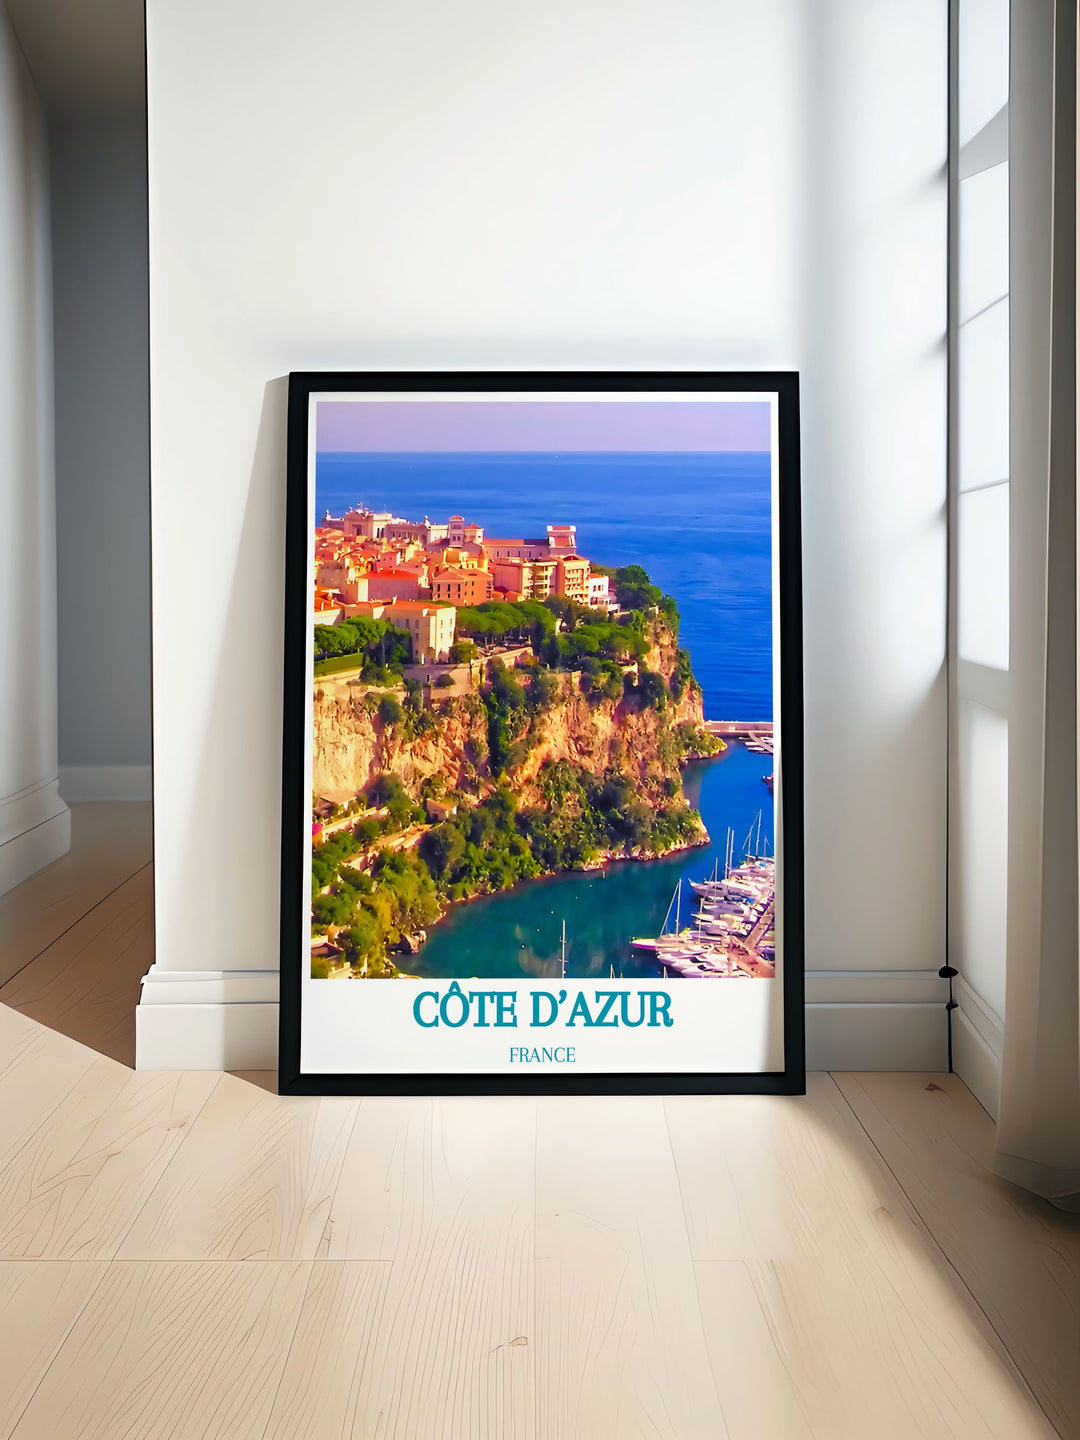 Fine art print capturing the breathtaking view of Le Rocher in the Côte dAzur. This poster highlights the stunning promontory overlooking Monaco, featuring the Princes Palace and the vibrant Mediterranean Sea, perfect for adding a touch of French elegance to any room.